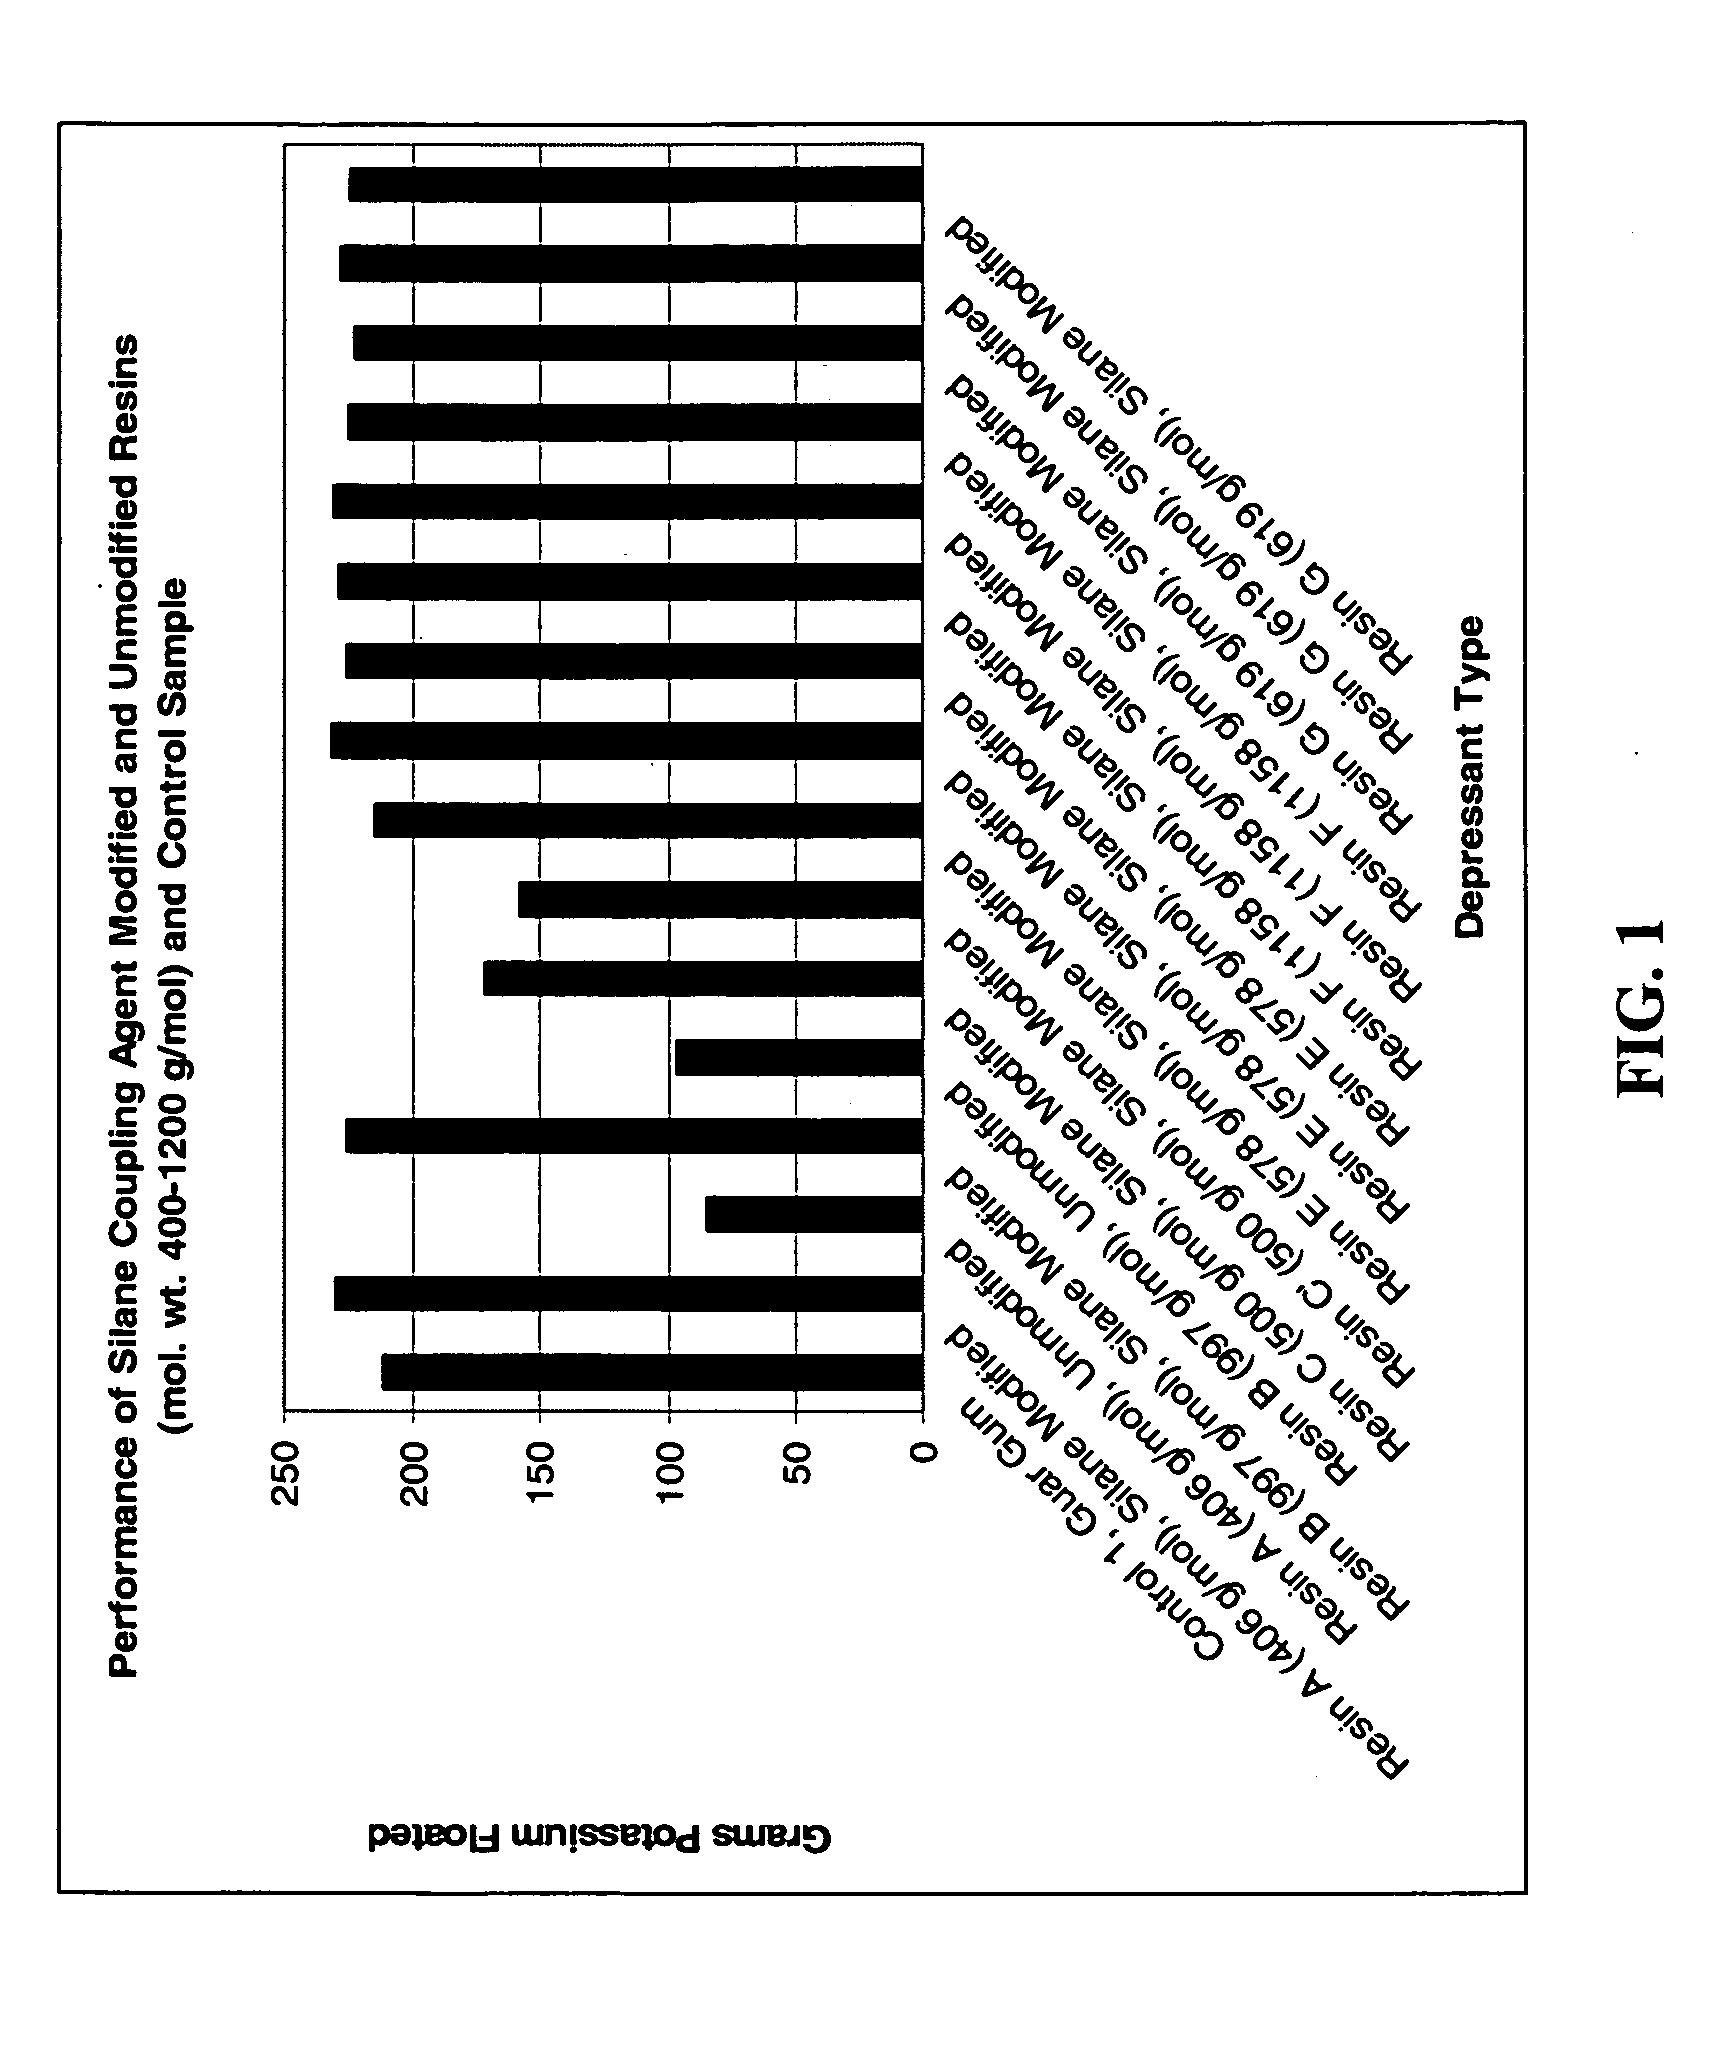 Modified amine-aldehyde resins and uses thereof in separation processes